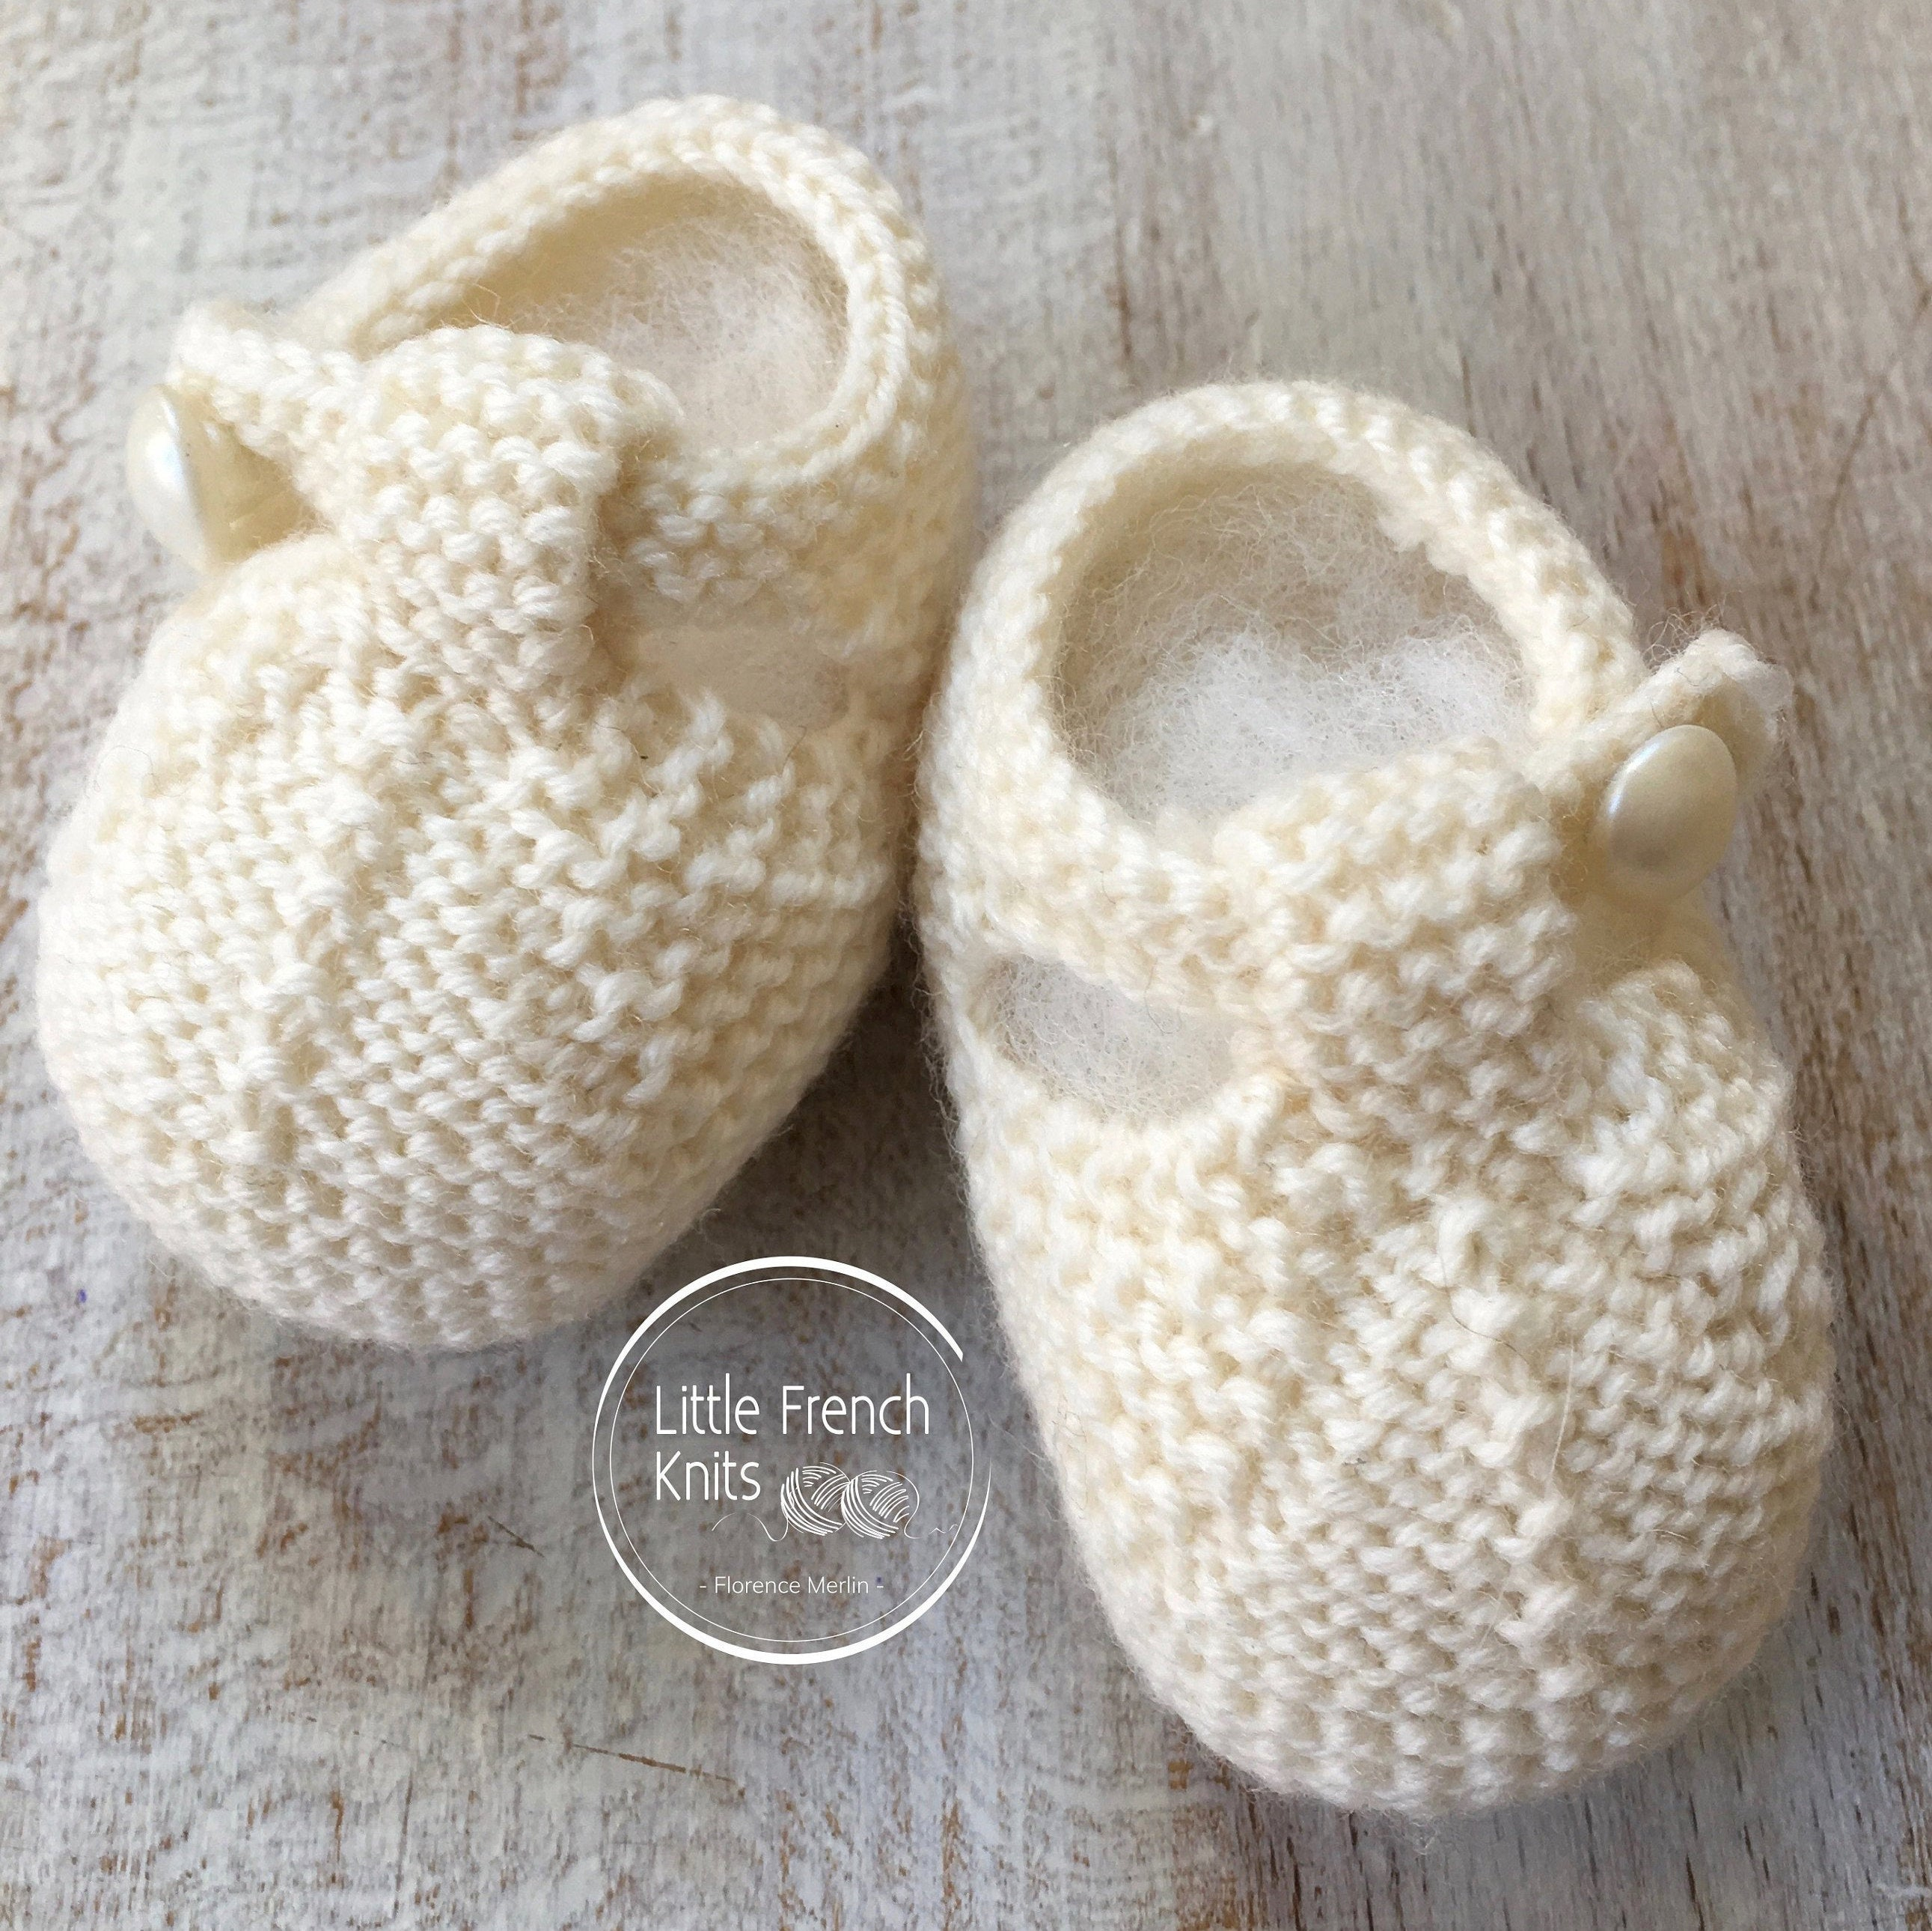 Baby Socks Knitting Patterns Knitting Pattern Ba Booties Instructions In English Instant Digital Download Pdf Sizes Newborn To 9 Months